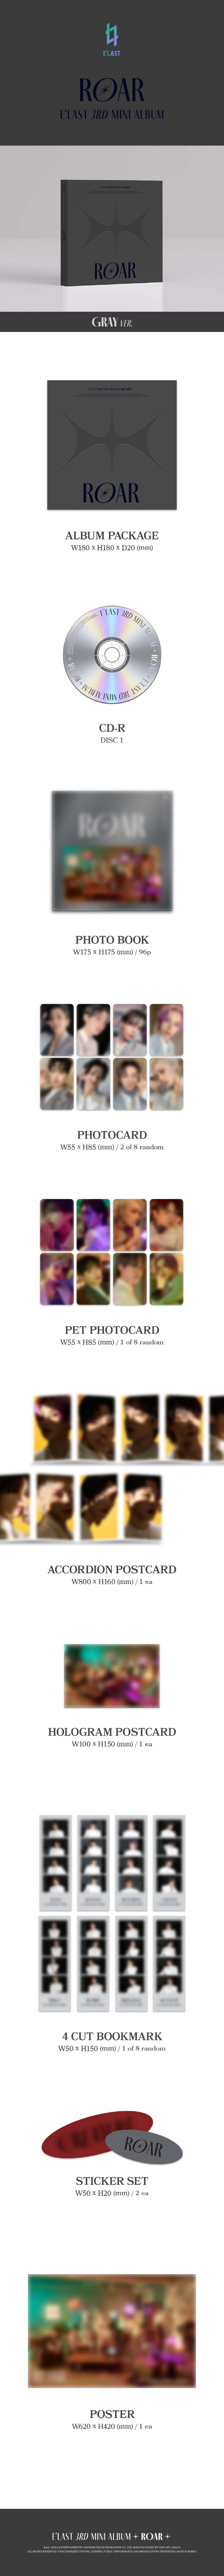 1 CD
1 Photo Book (96 pages)
2 Photo Cards (random out of 8 types)
1 PET Photo Card (random out of 8 types)
1 Accordion Po...